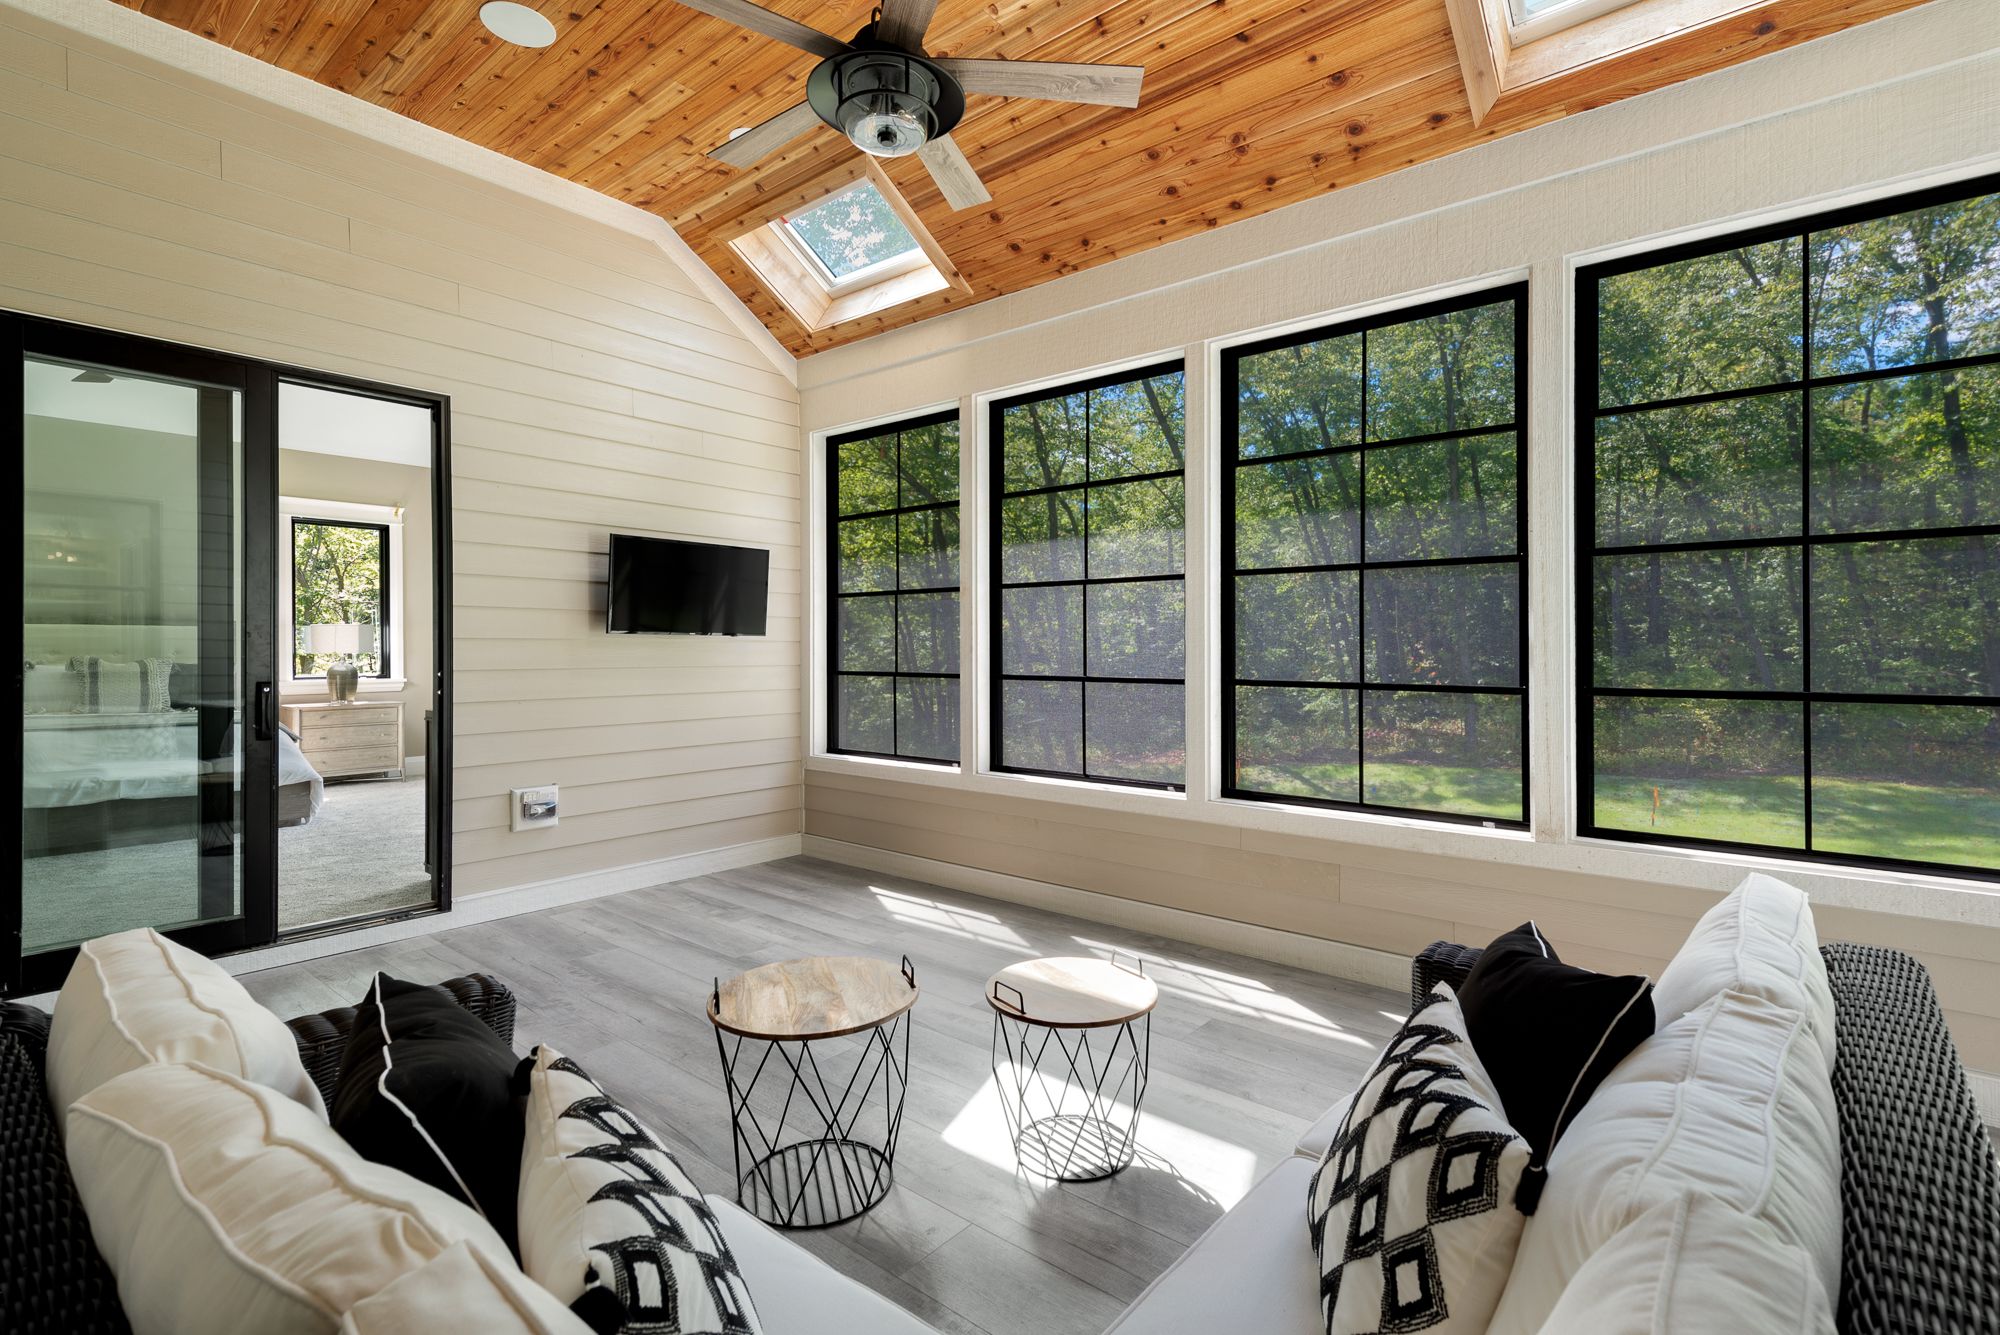 Sunroom with wood ceiling, sky lights and black window frames